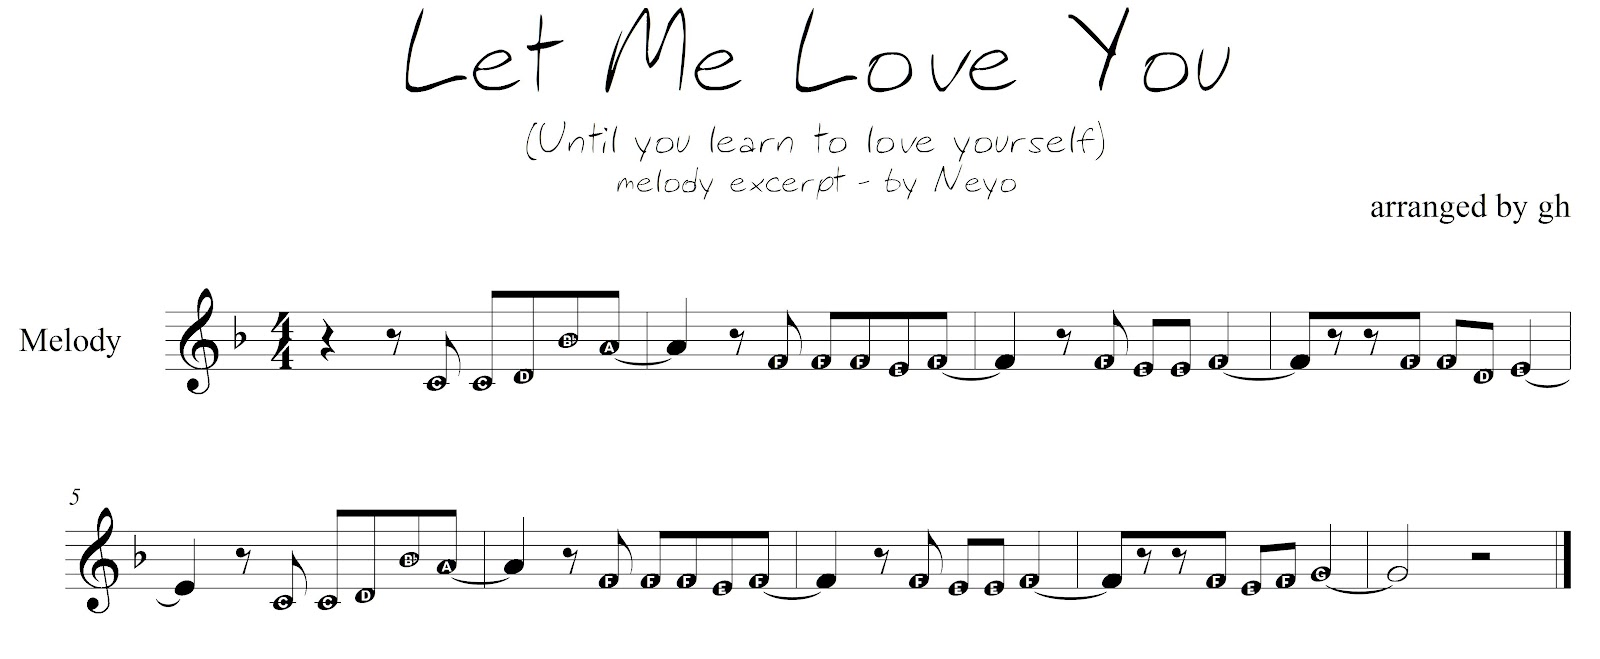 Lyrics For Let Me Love You By Mario Songfacts